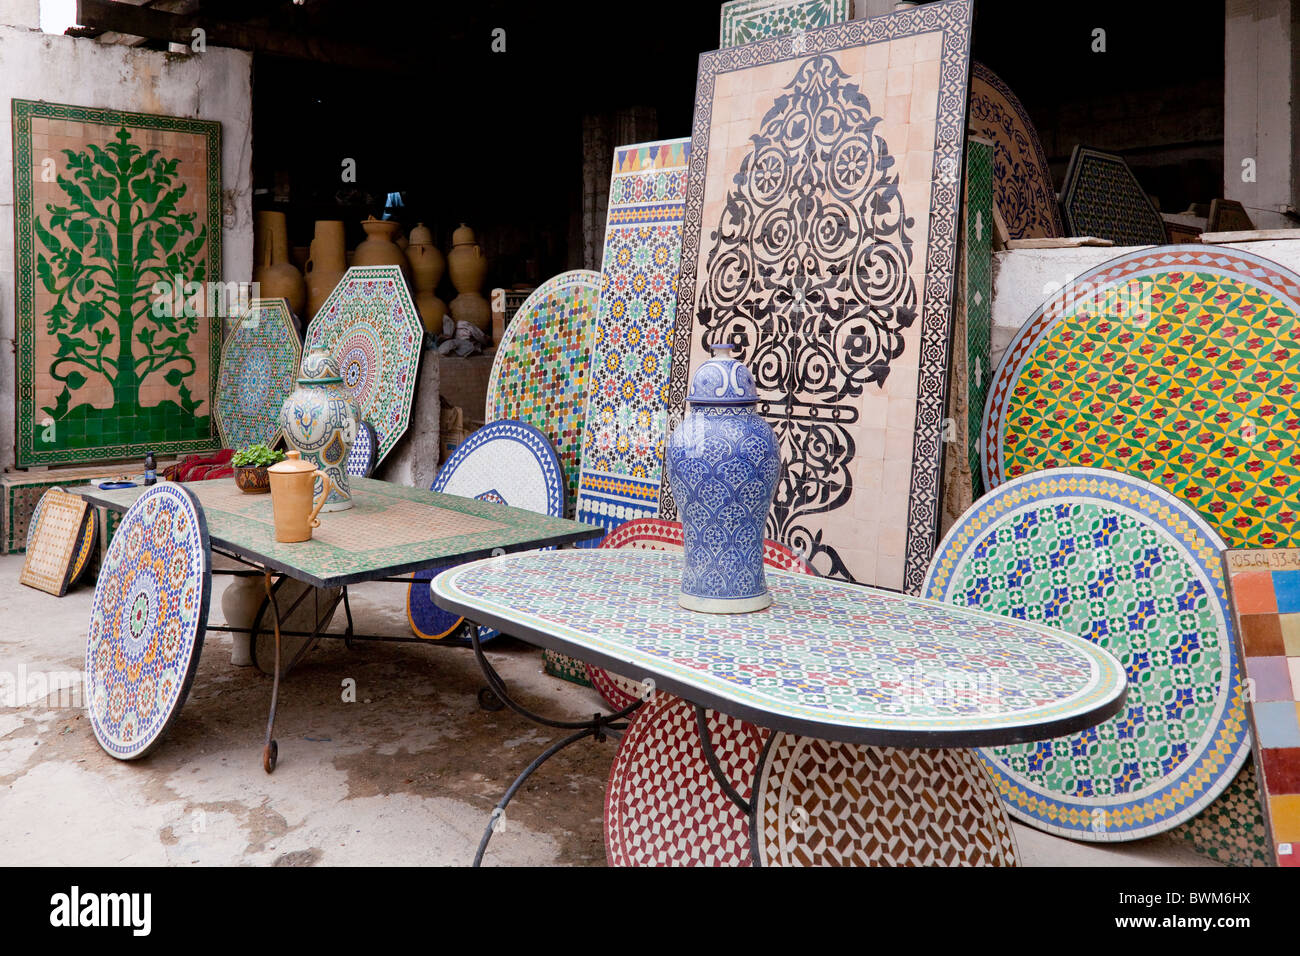 A ceramic factory manufacturing mosaic tile fountains and furniture in Fes, Morocco. Stock Photo